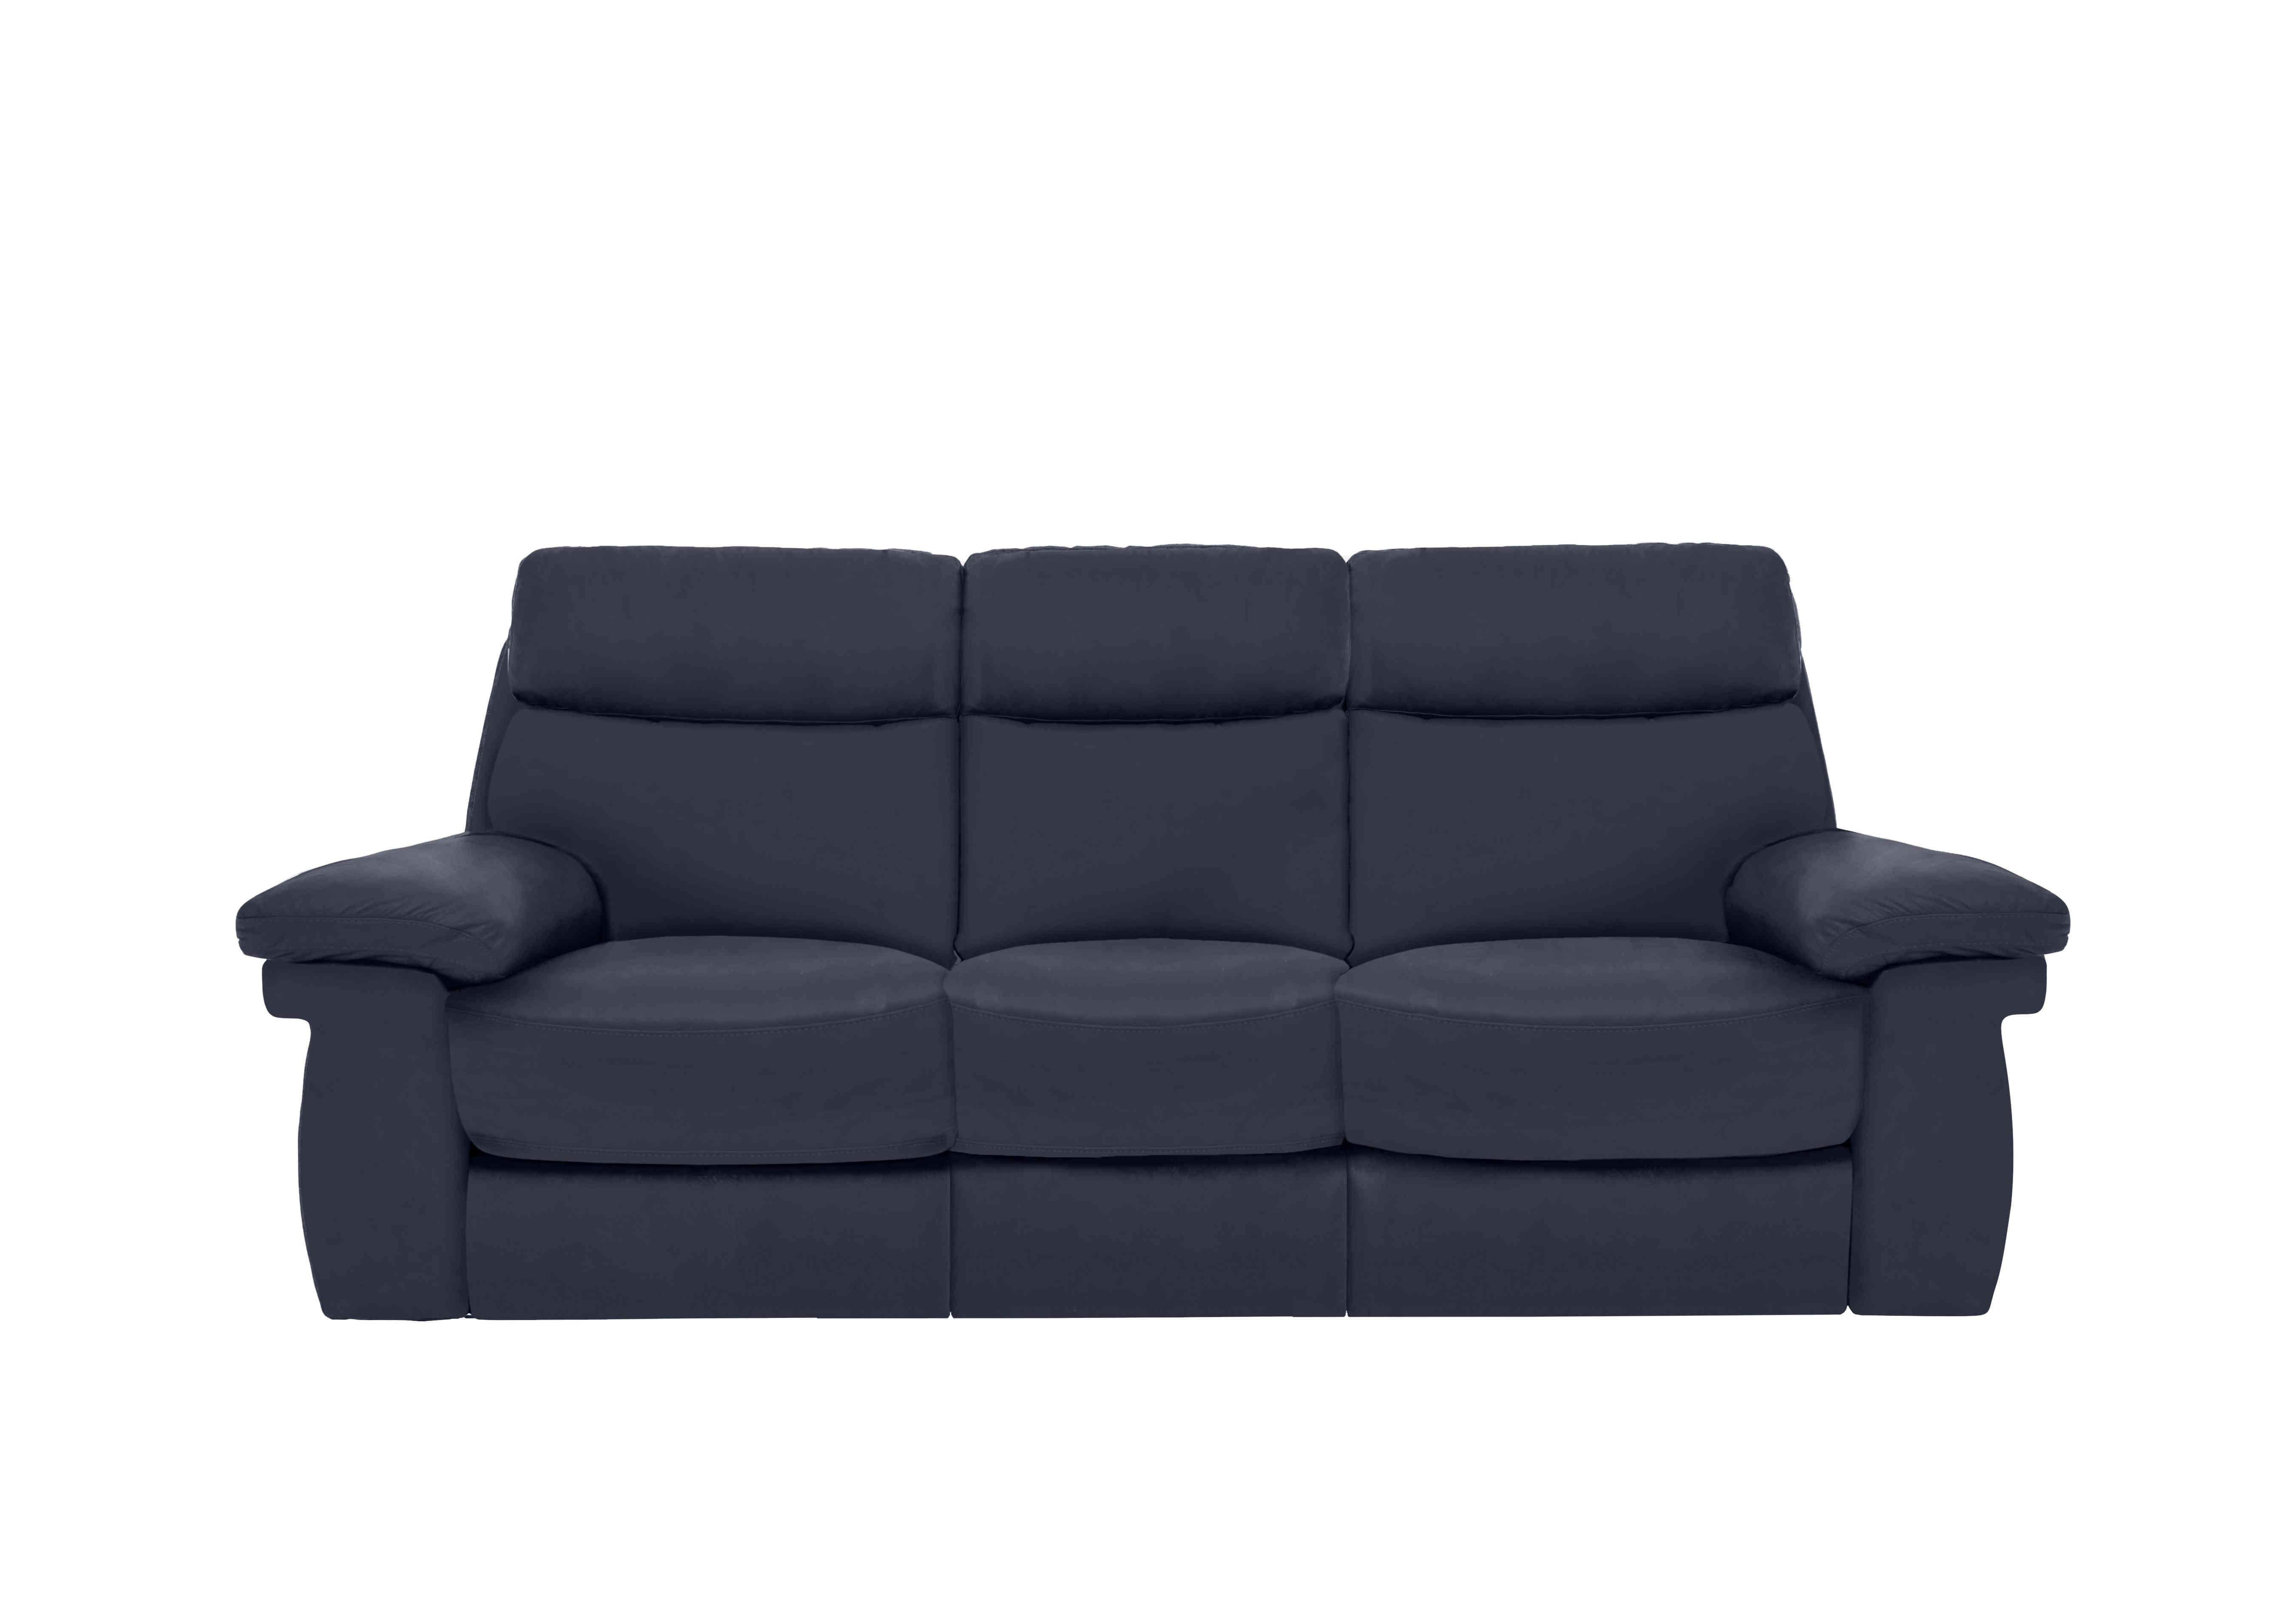 Serene 3 Seater Leather Power Recliner Sofa with Drop Down Table and Power Headrests in Bx-036c Navy on Furniture Village